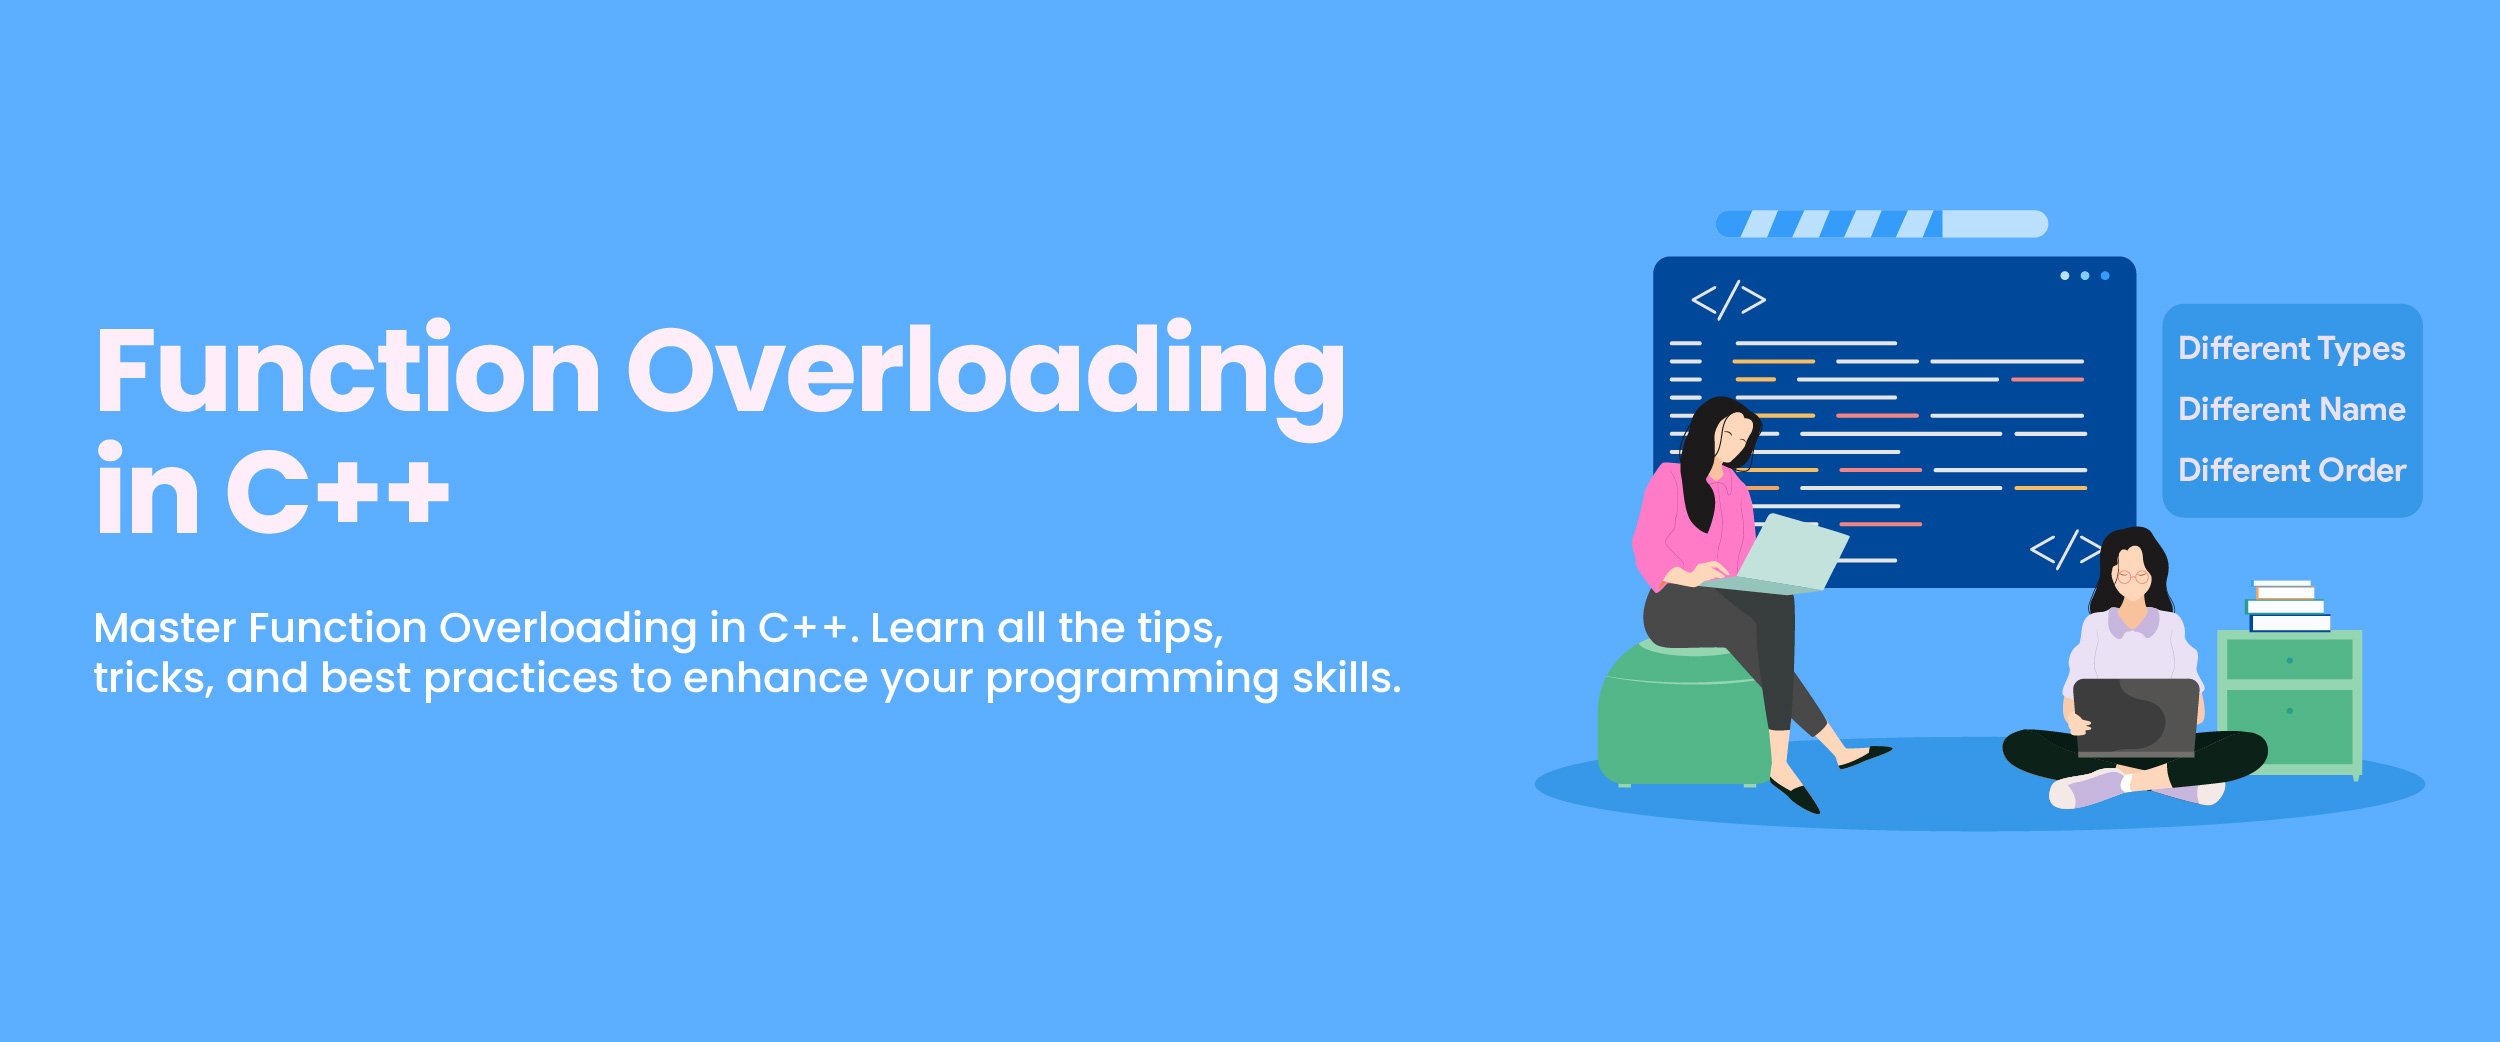 Overloading Functions in C++ Programming with Examples